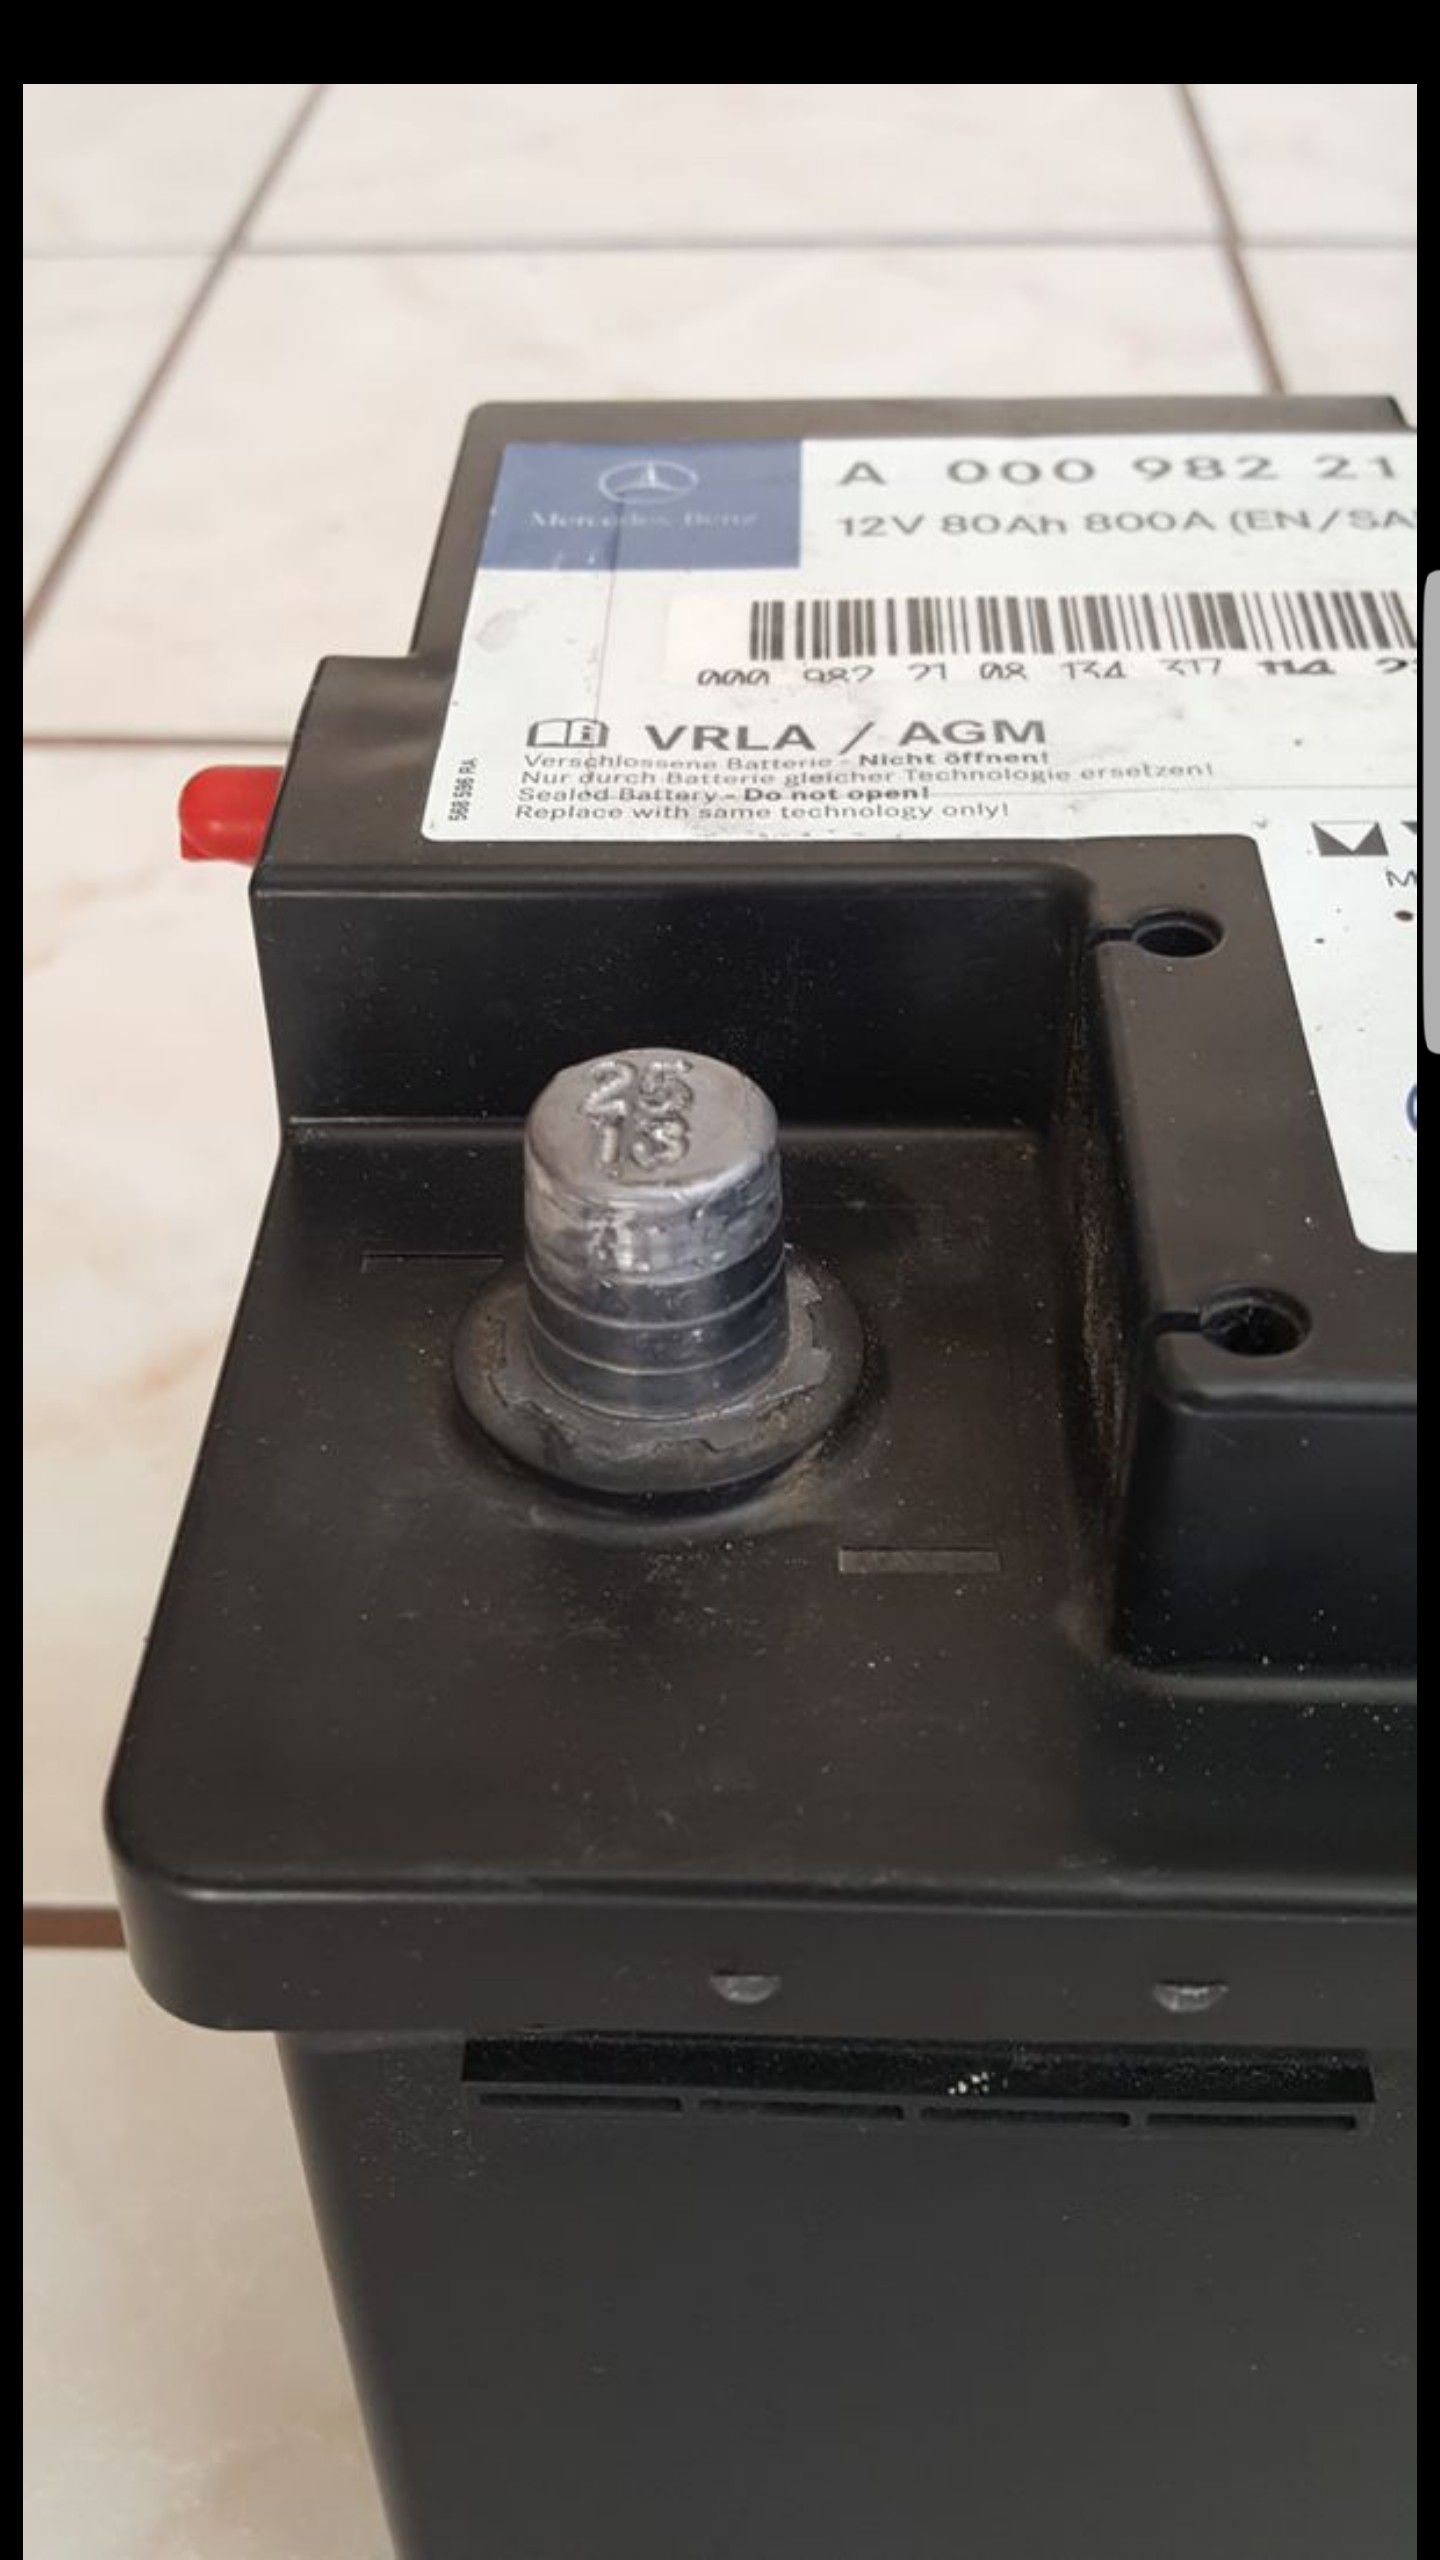 New Mercedes Benz Car Battery 12V 80Ah 800A for Sale in Placentia, CA -  OfferUp